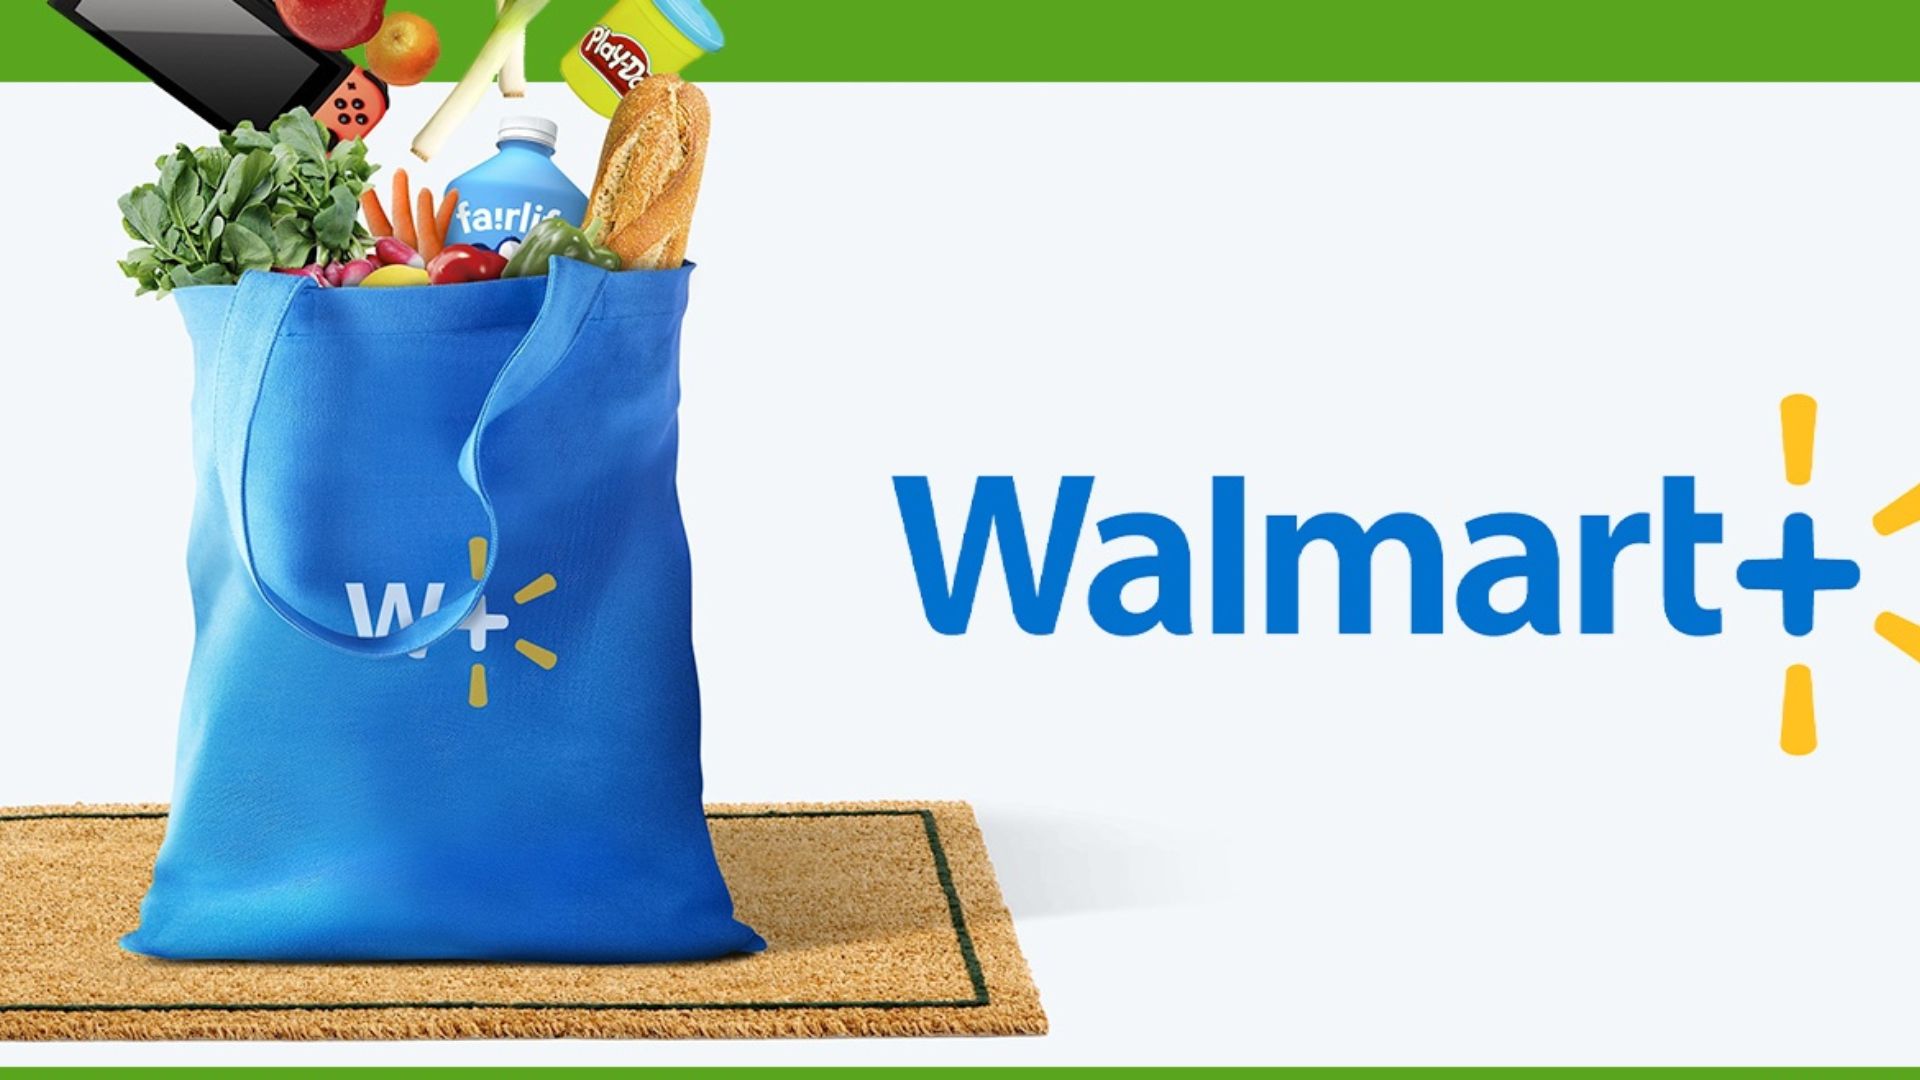 Walmart Plus An Affordable Shopping Solution.